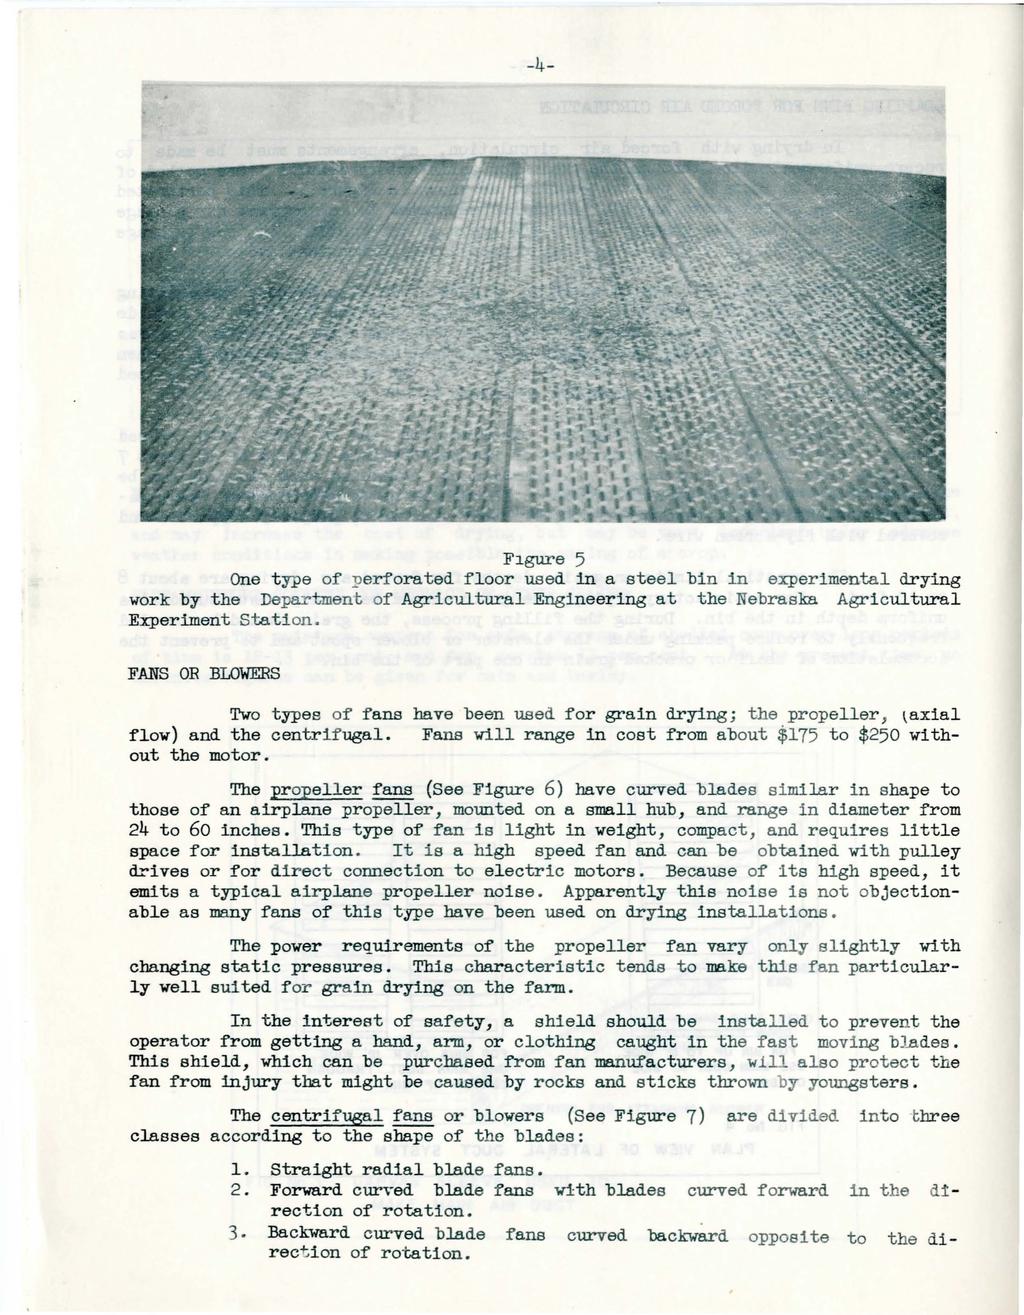 -4- Figure 5 One t ype of' perforated floor used in a steel bin in exper i mental drying work by t he Department of Agricultural Engineering at the Nebraska Agricultural Experiment Stat i on.